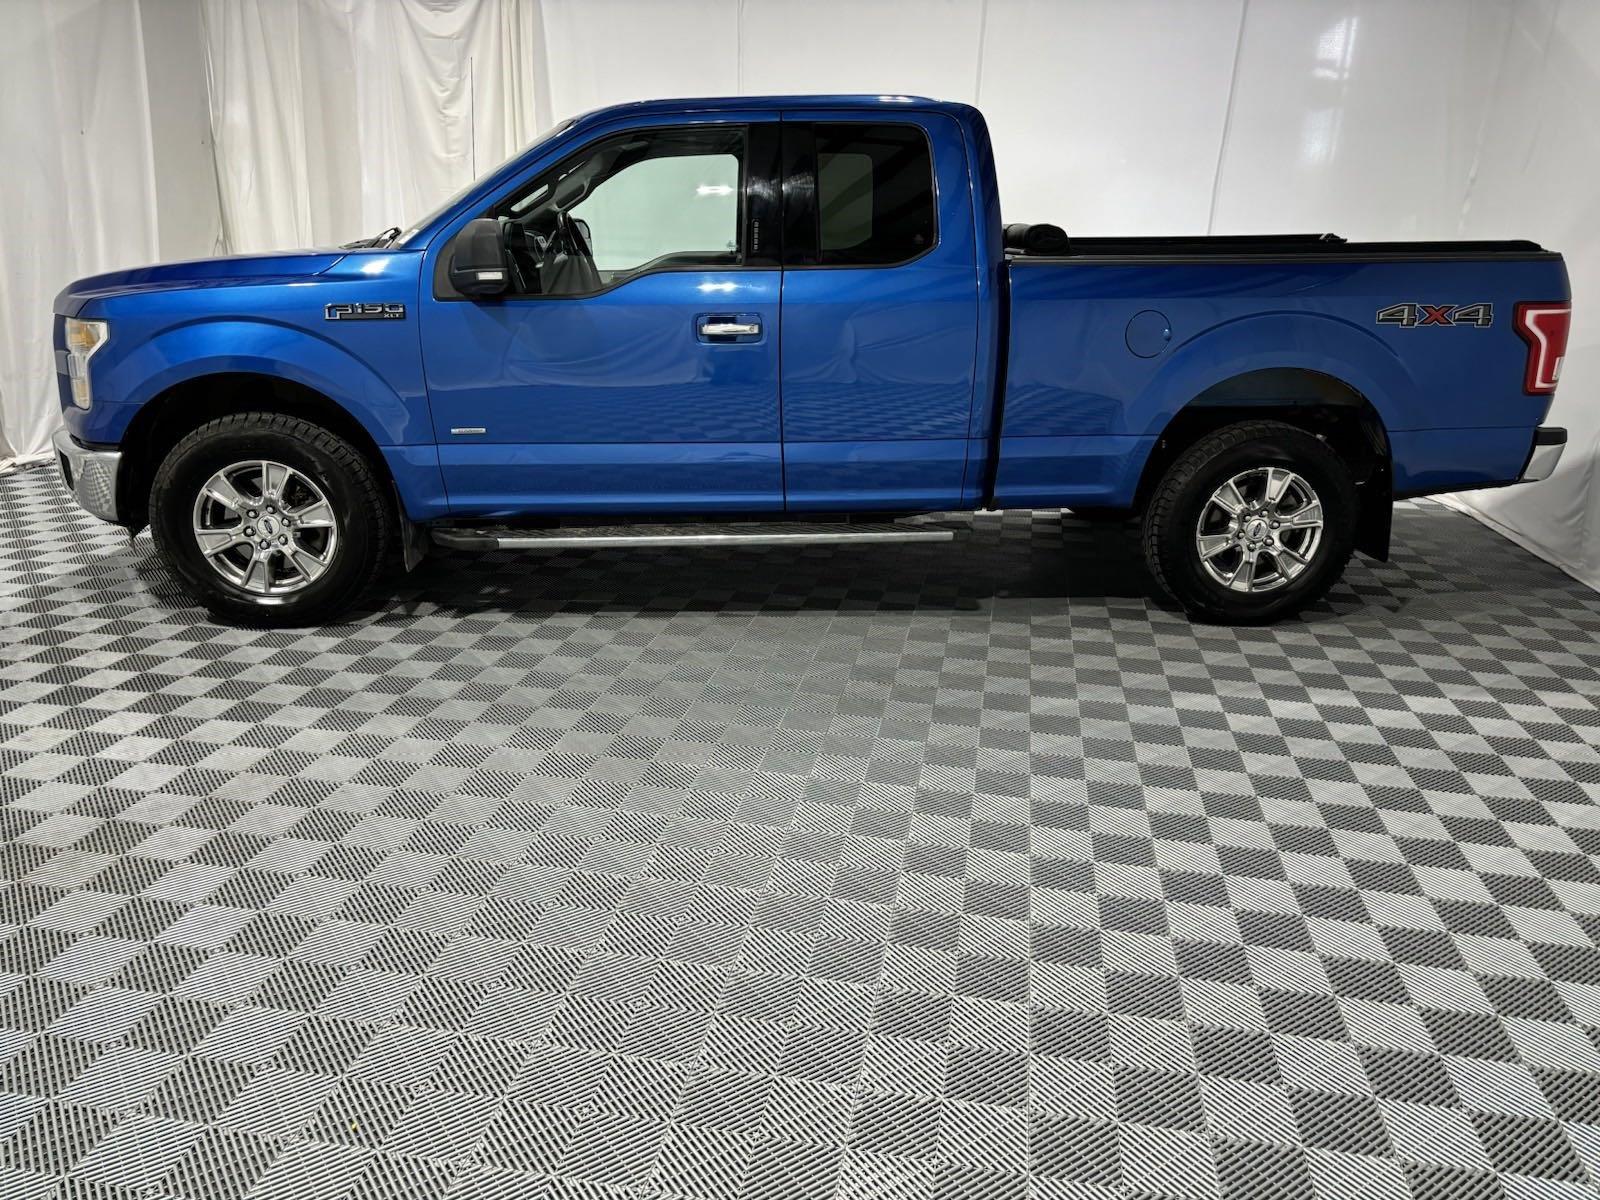 Used 2015 Ford F-150 XLT Super Cab Truck for sale in St Joseph MO